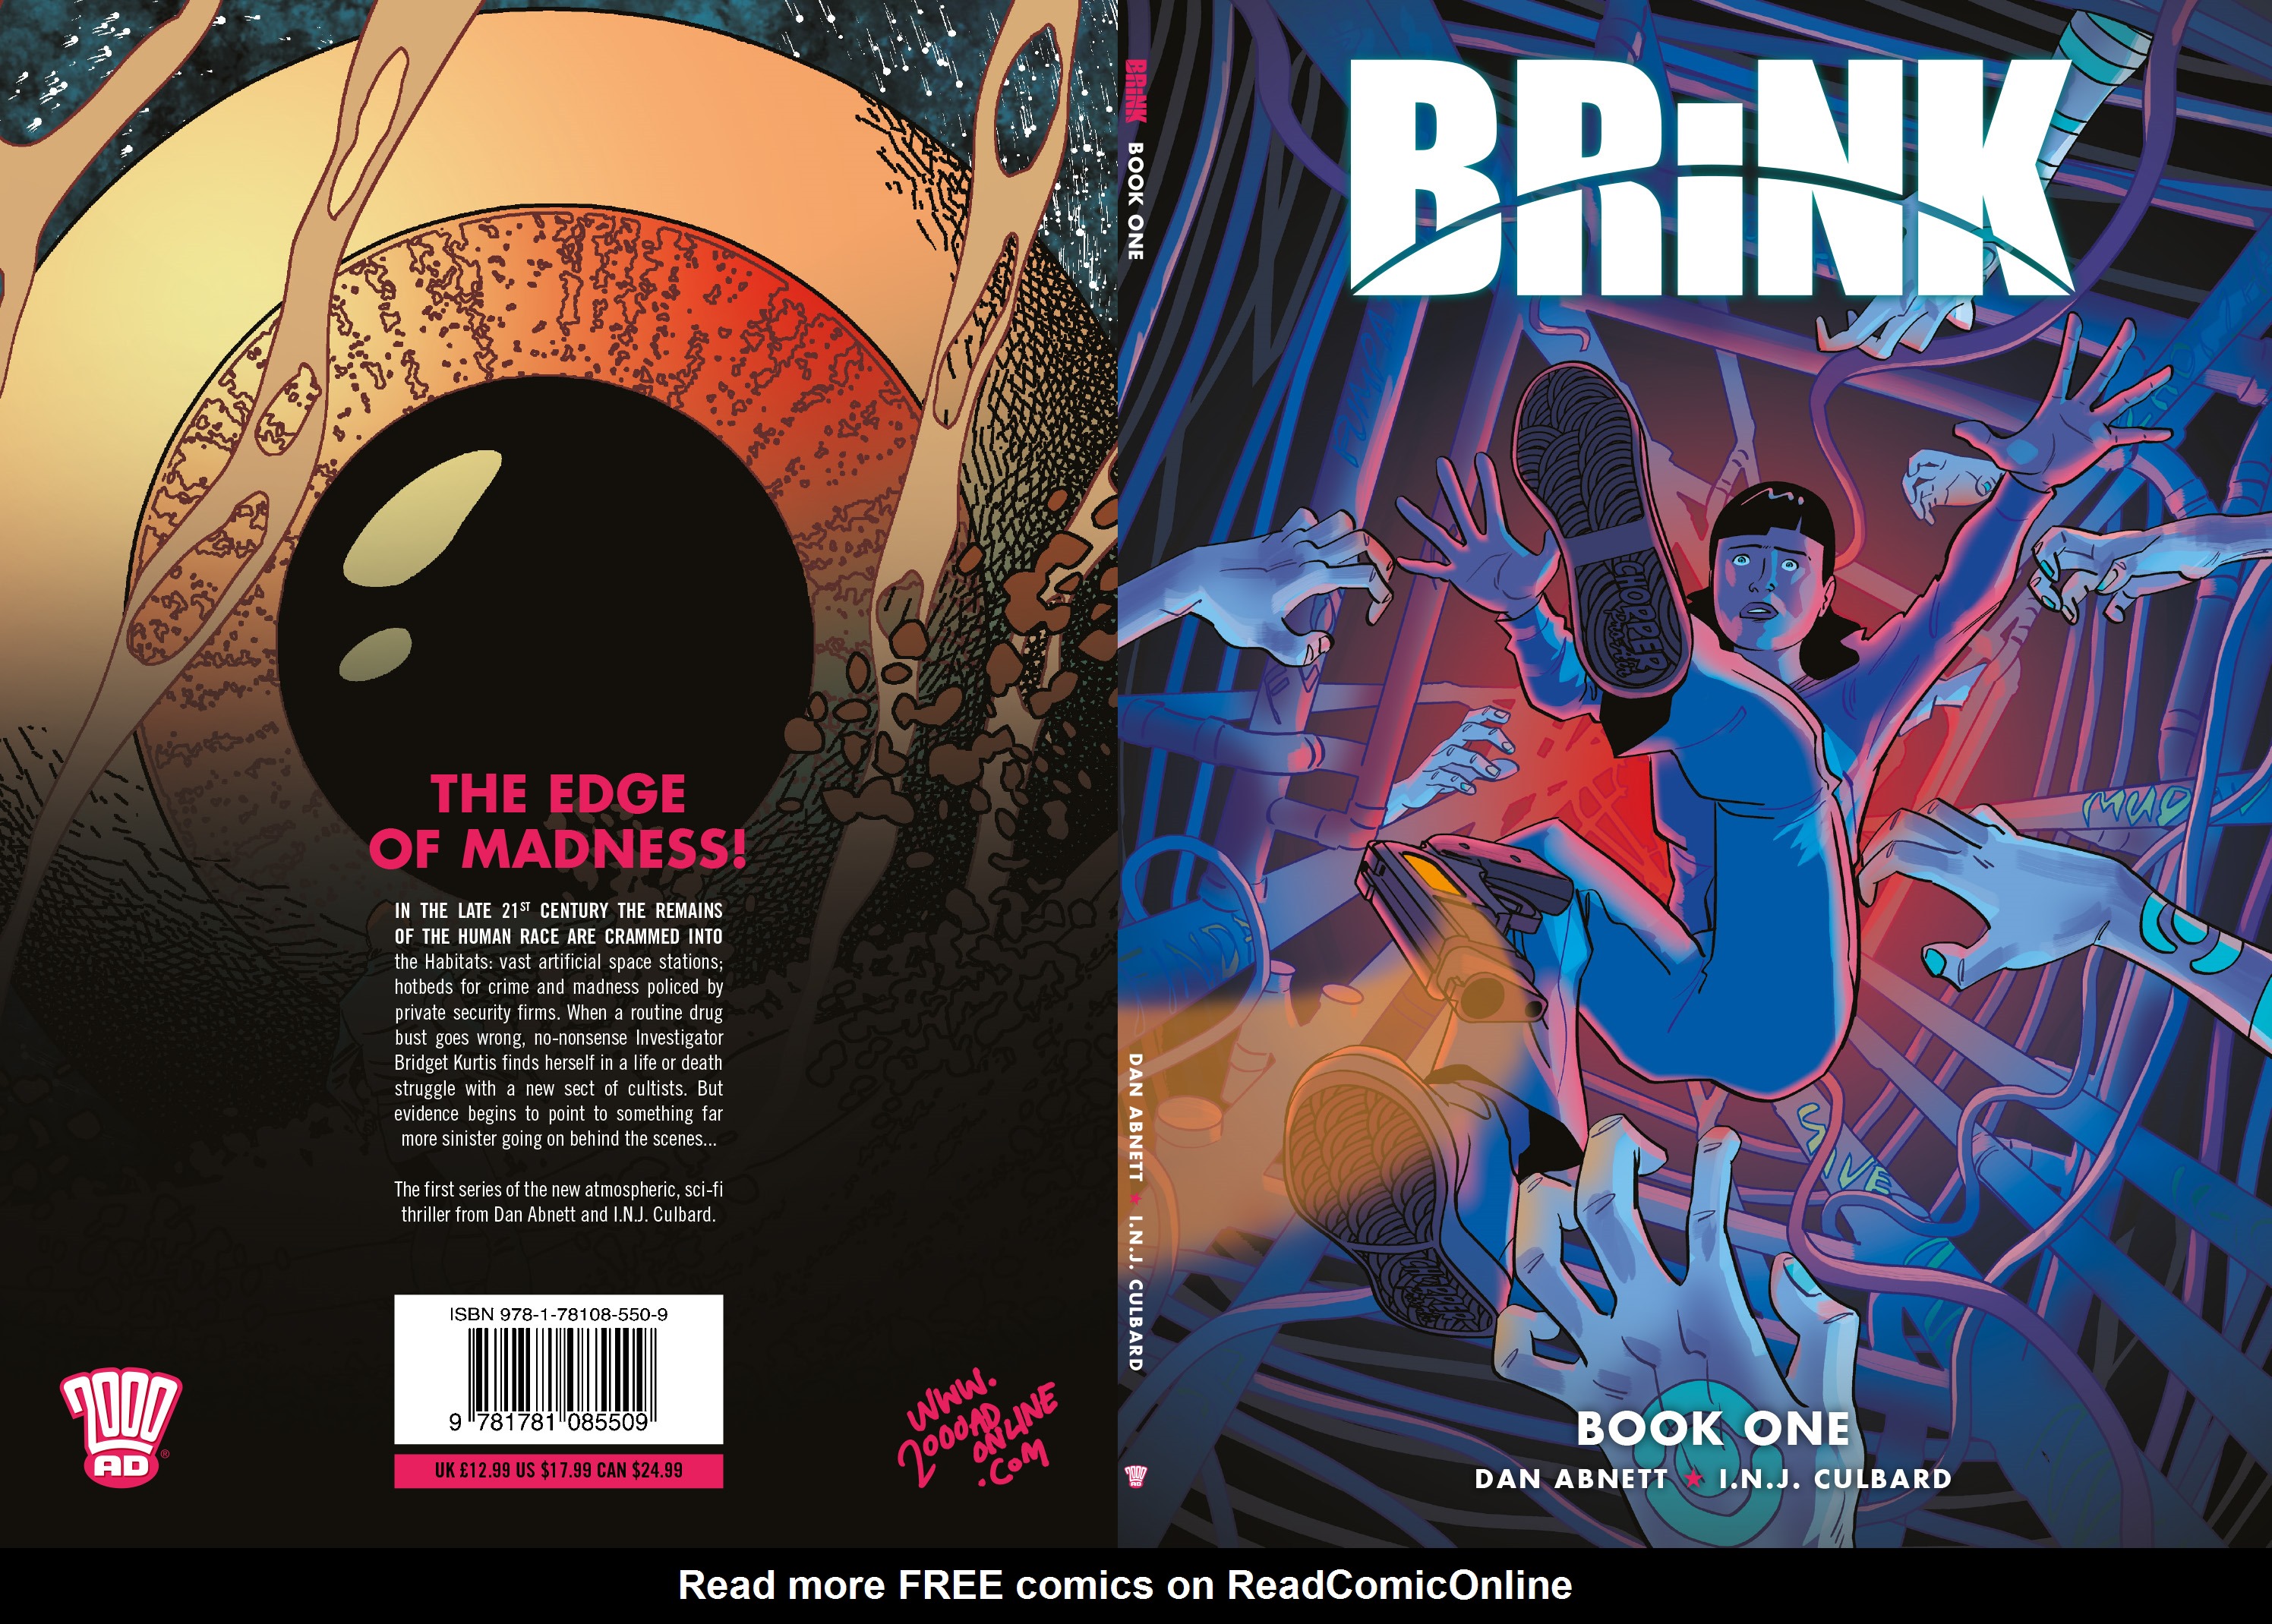 Read online Brink comic -  Issue # TPB 1 - 1